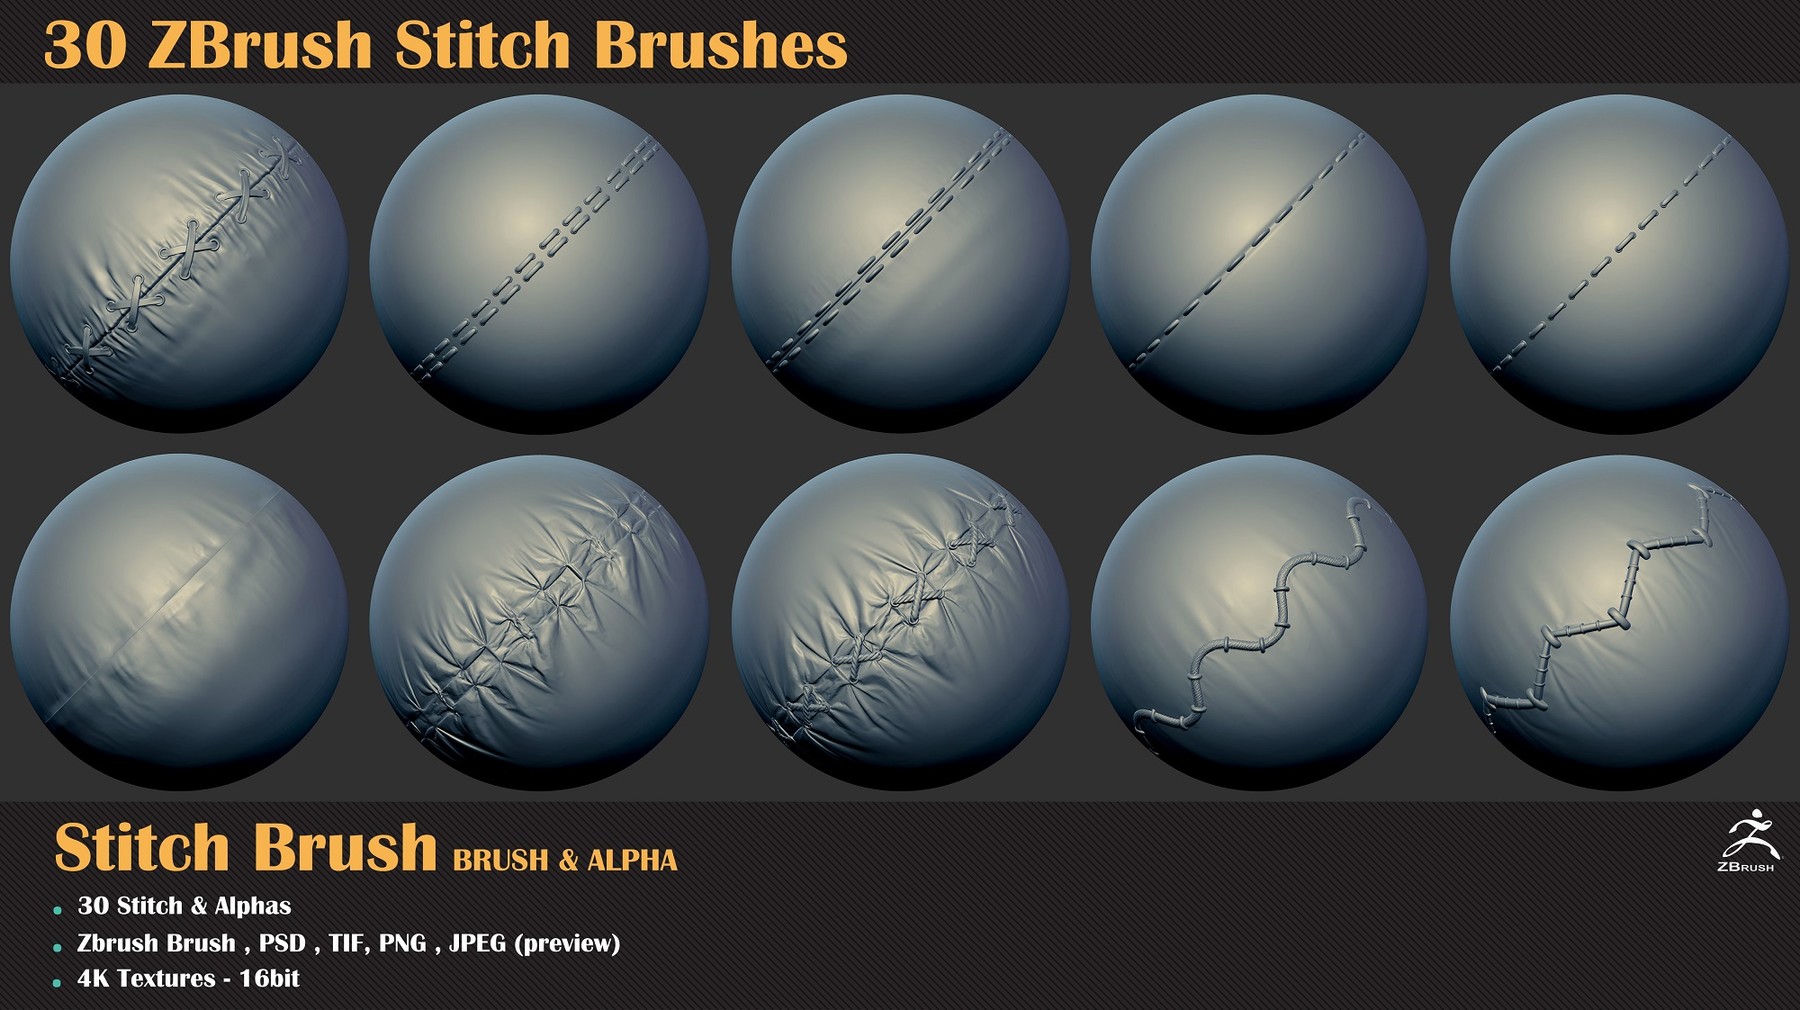 jean_stich.zbp brush zbrush